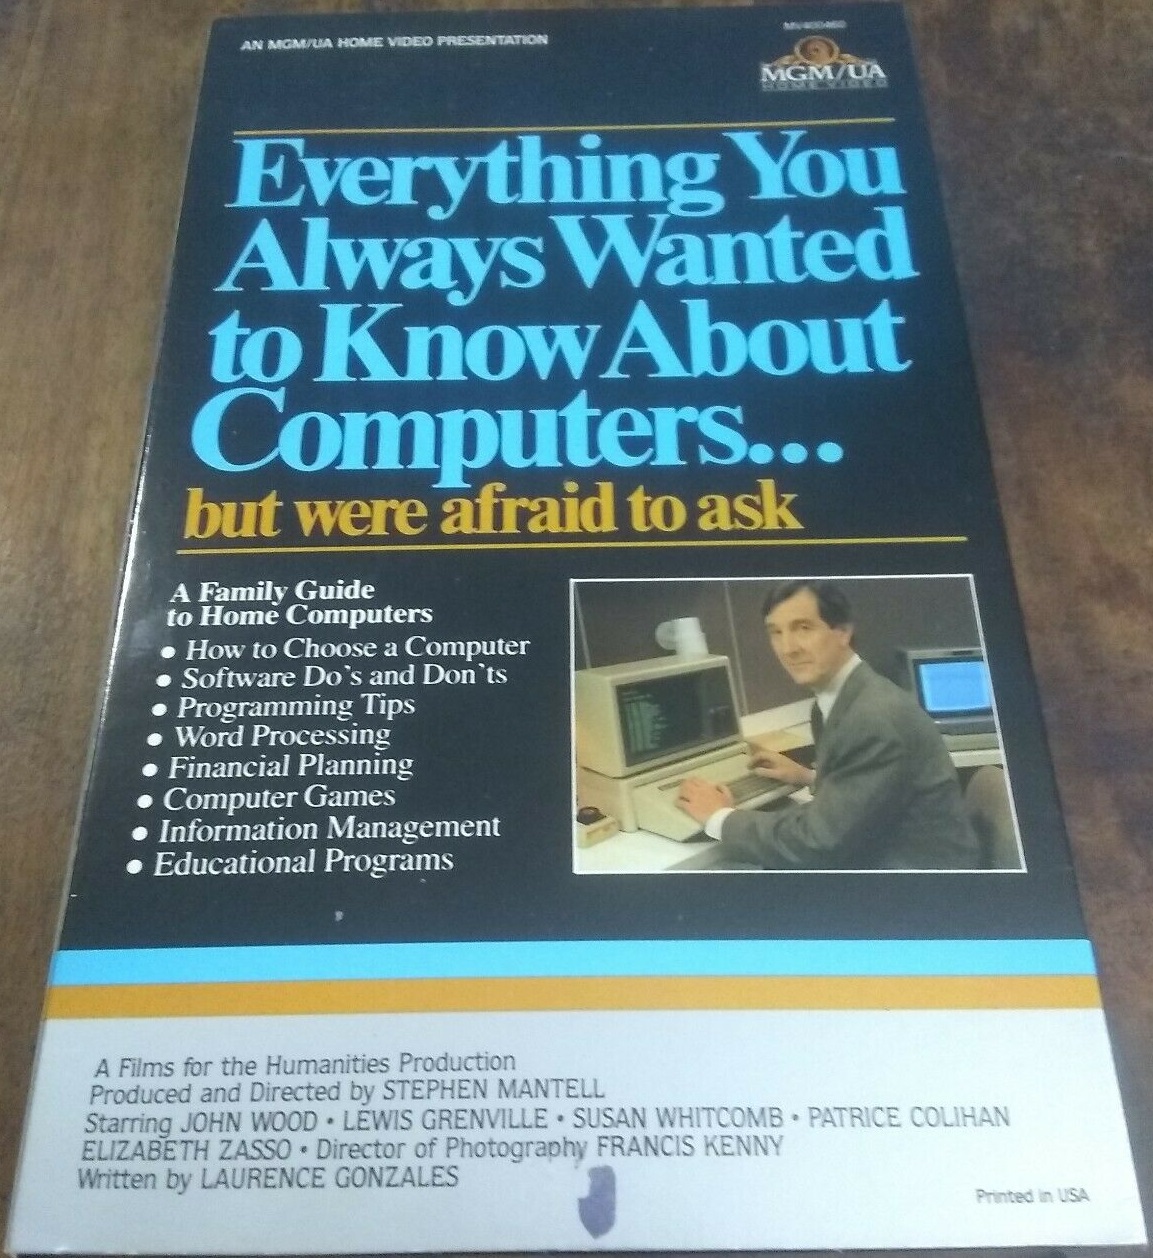 Everything You Always Wanted to Know About Computers... But Were Afraid to Ask (1984) Screenshot 3 